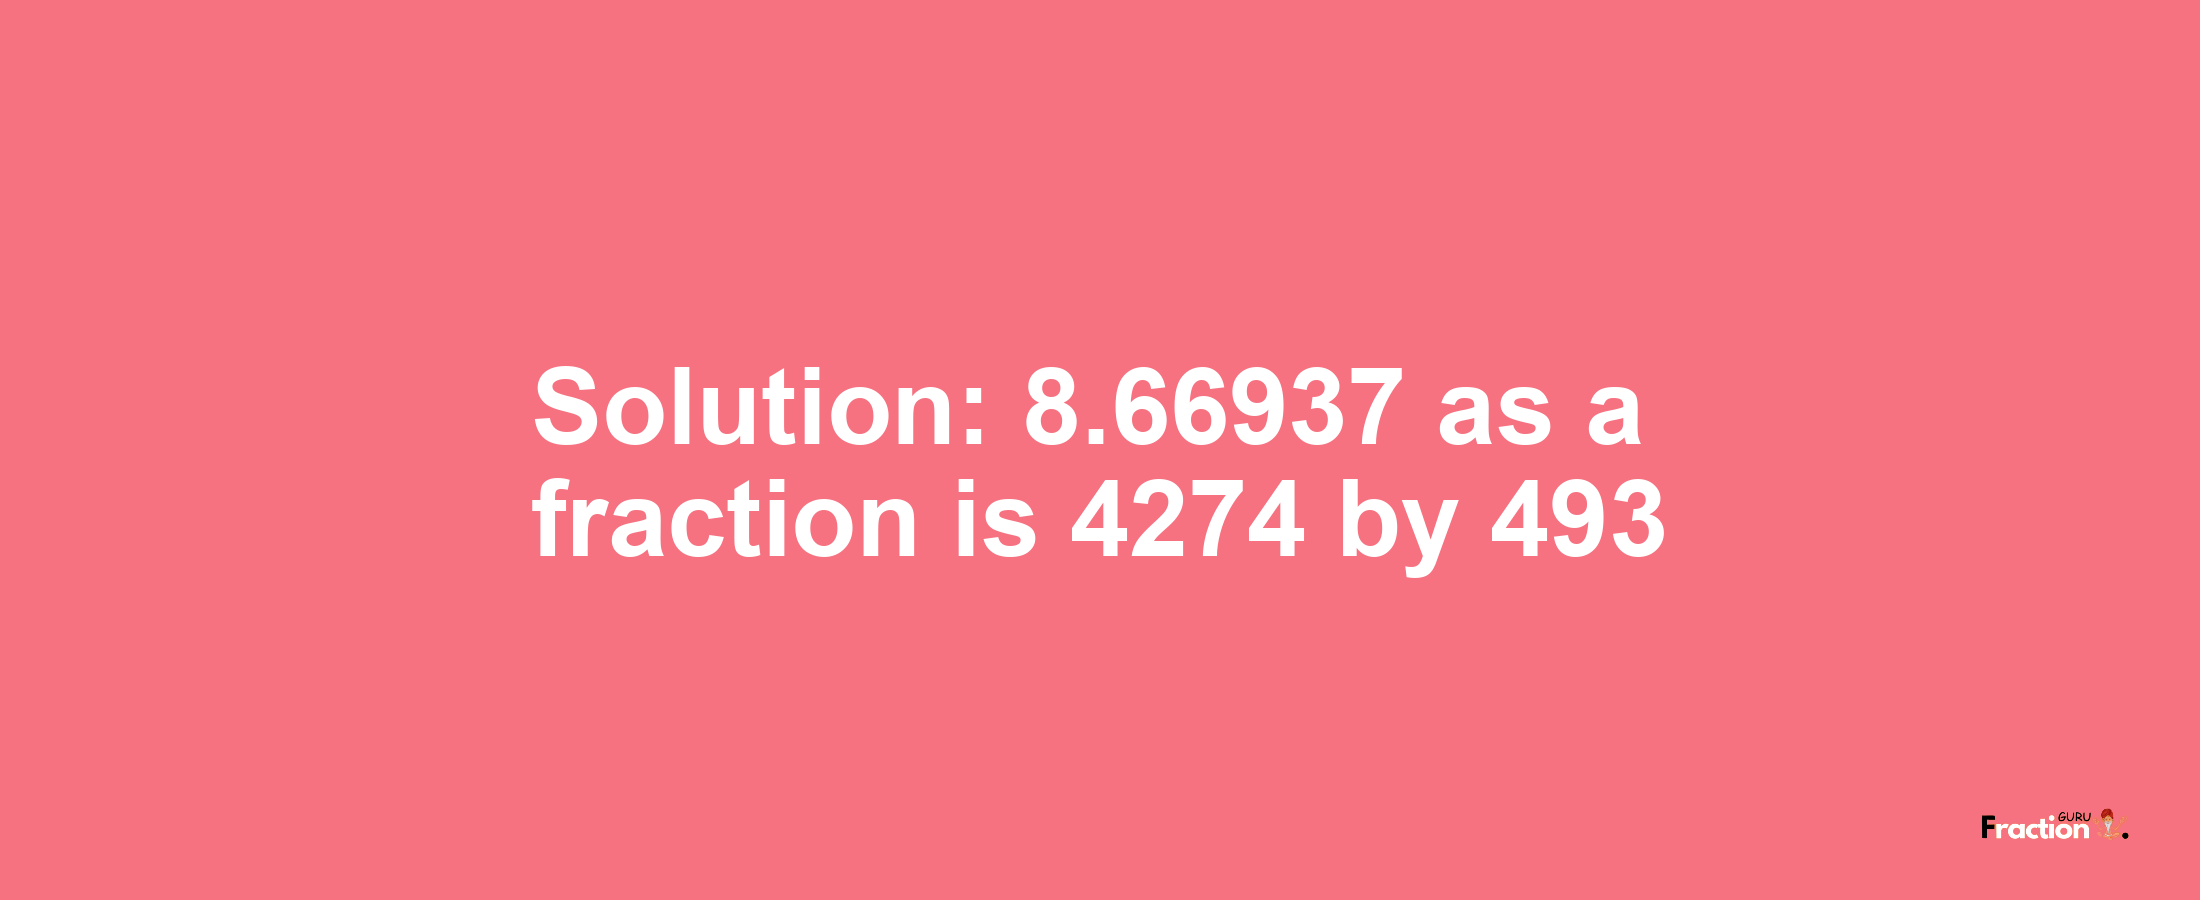 Solution:8.66937 as a fraction is 4274/493